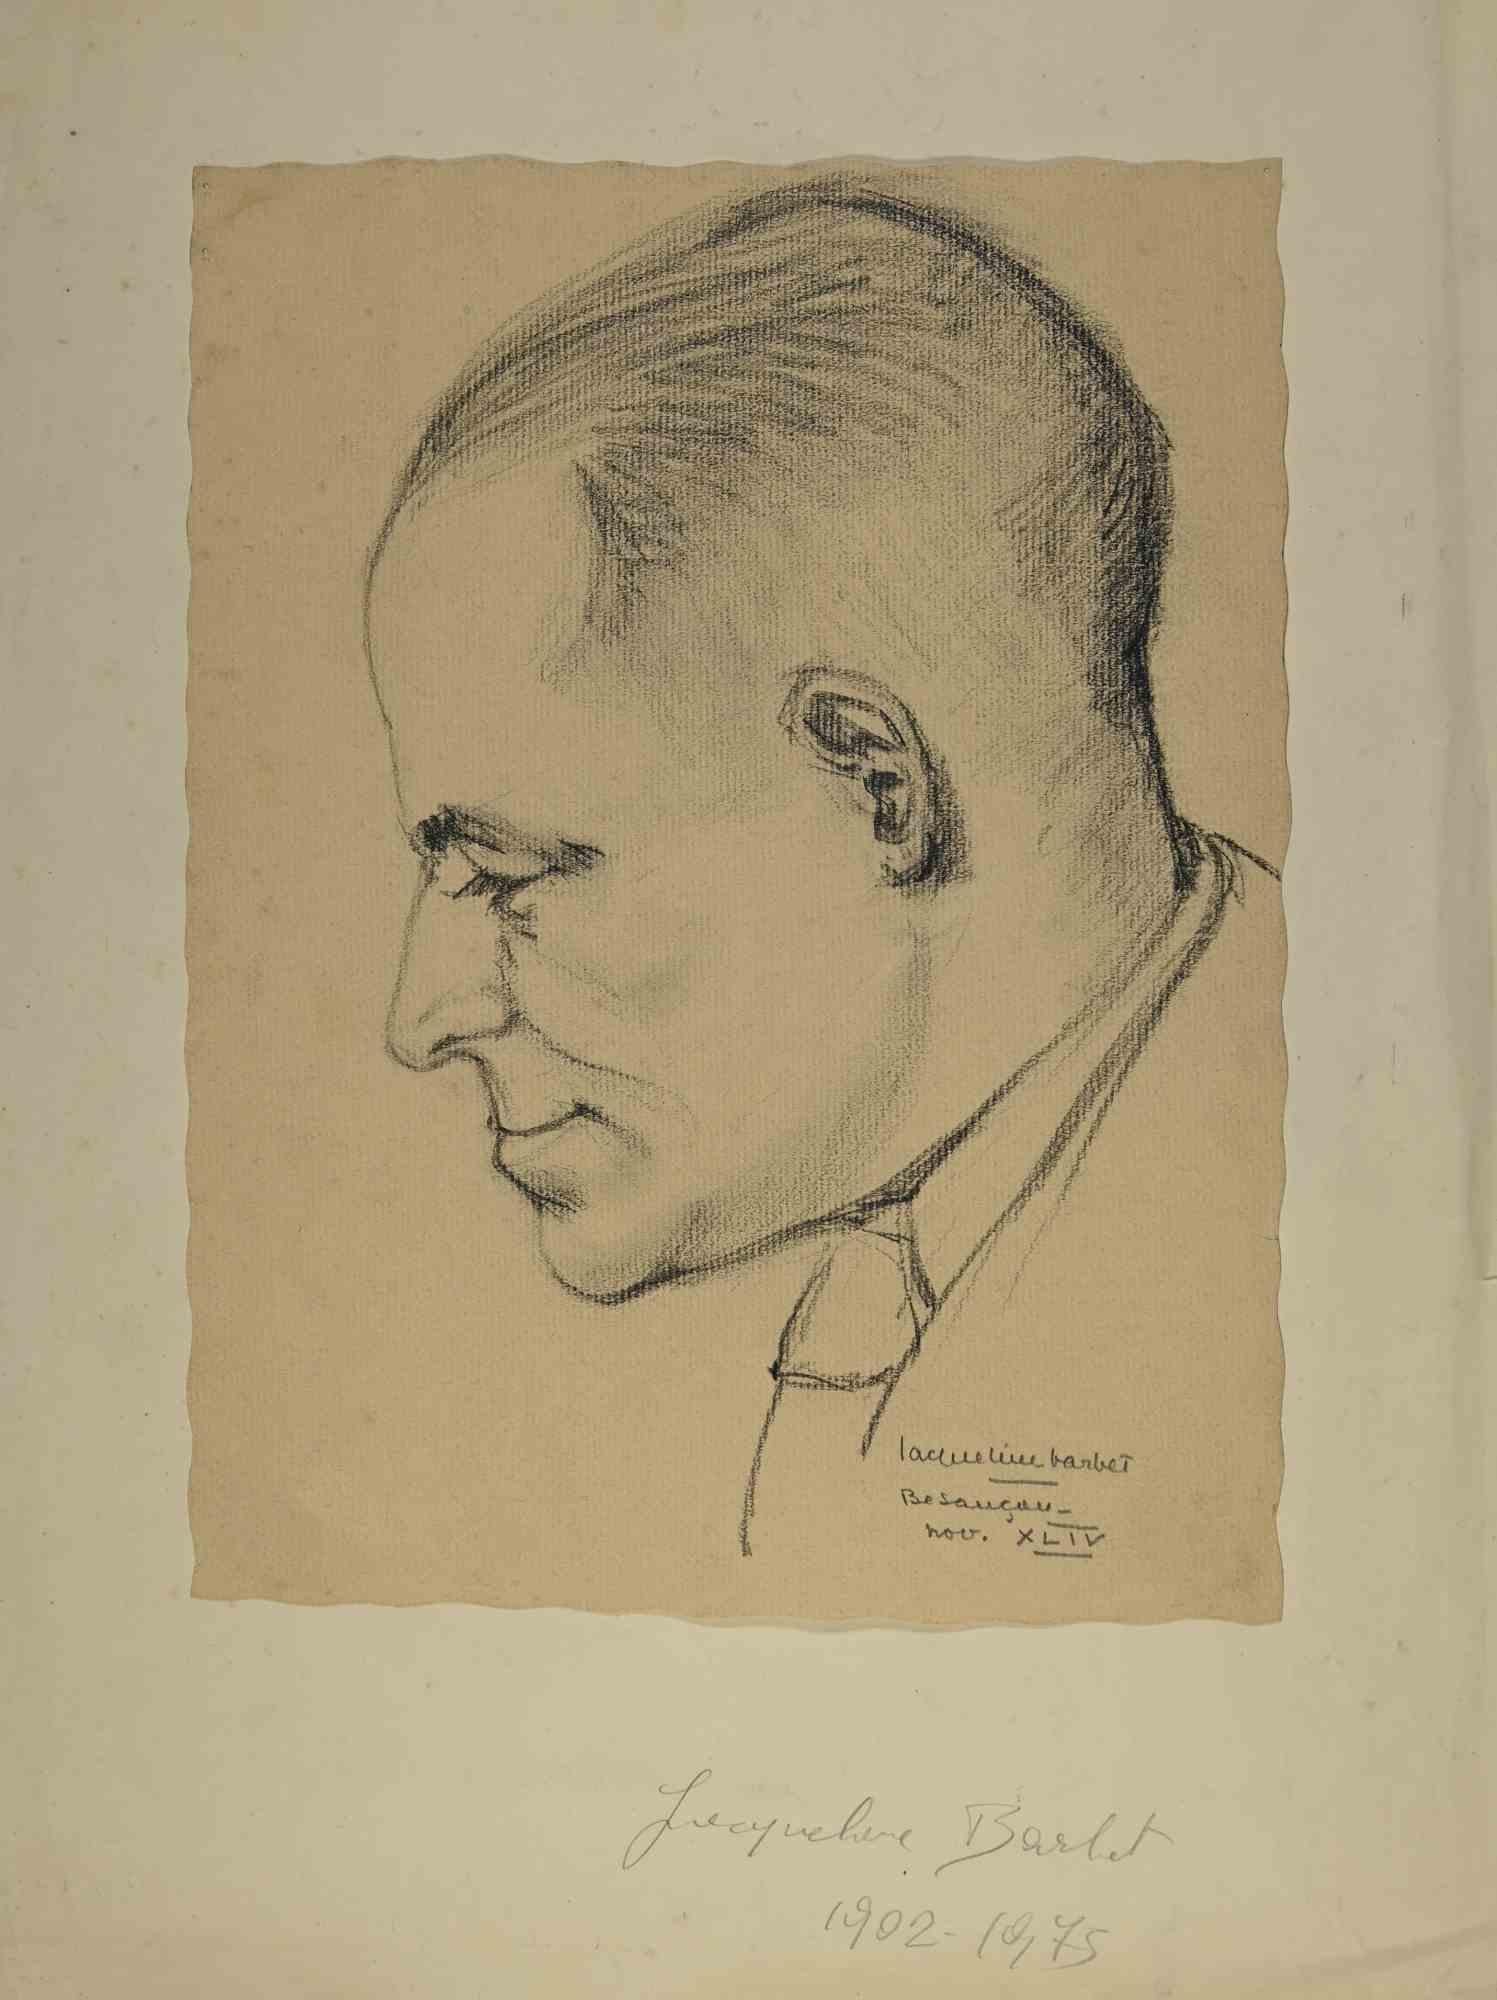 Portrait of a Man is an artwork realized by the french Artist Jacqueline Barbet (1902-1975), in 1944.

Drawing Charcoal on paper. Hand-signed and numbered in pencil in Roman numerals on the lower right margin by the artist.

The work  is glued on